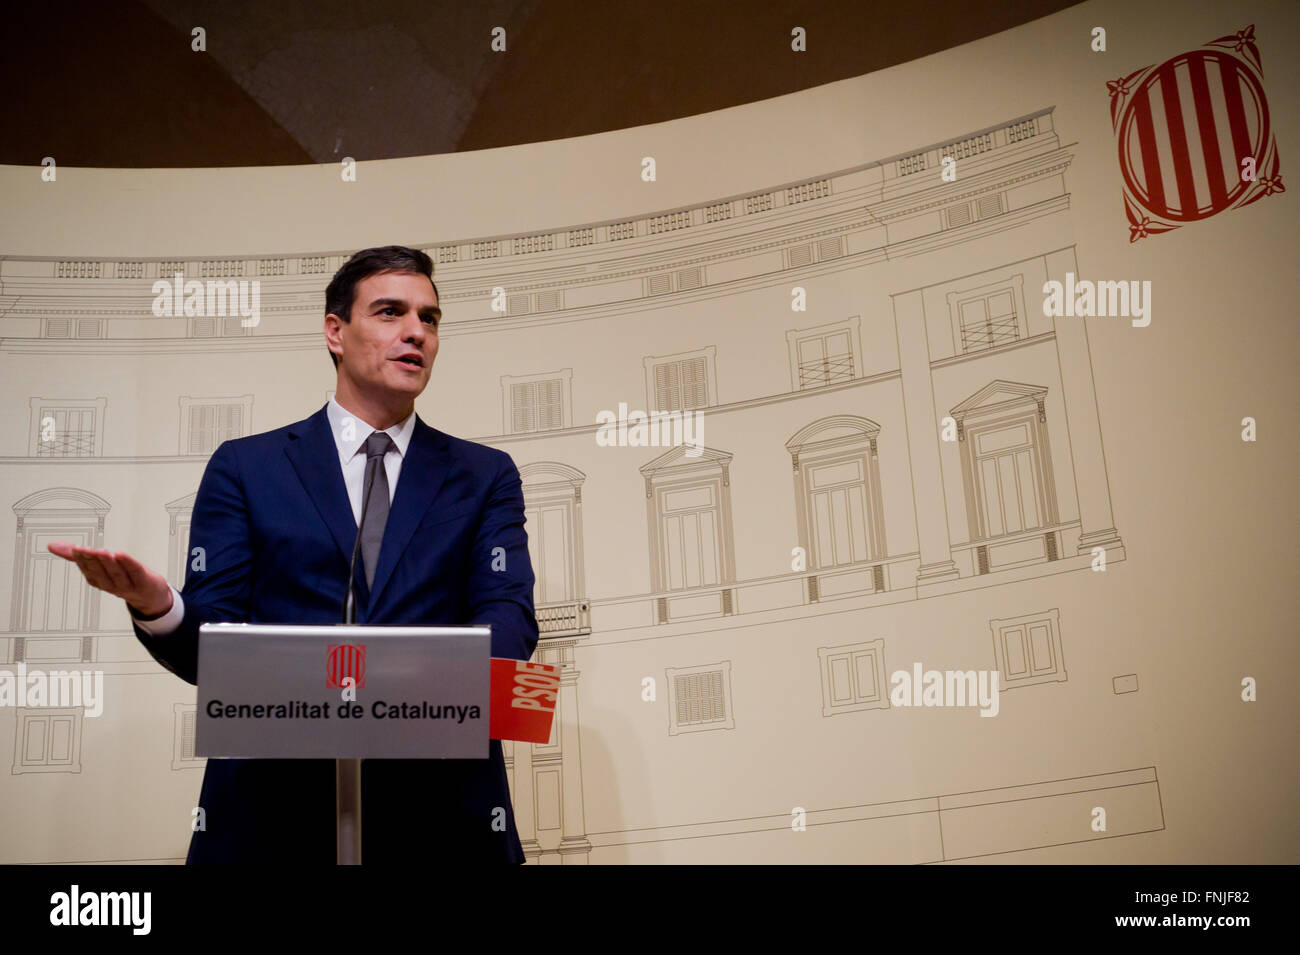 Barcelona, Catalonia, Spain. 15th Mar, 2016. Spain's Socialist party leader Pedro Sanchez addresses journalists during the press conference that was held in the Palau de la Generalitat (Catalan government headquarters) in Barcelona, Spain after meeting with Catalan regional president Carles Puigdemont on 15 March, 2016. Credit:  Jordi Boixareu/ZUMA Wire/Alamy Live News Stock Photo